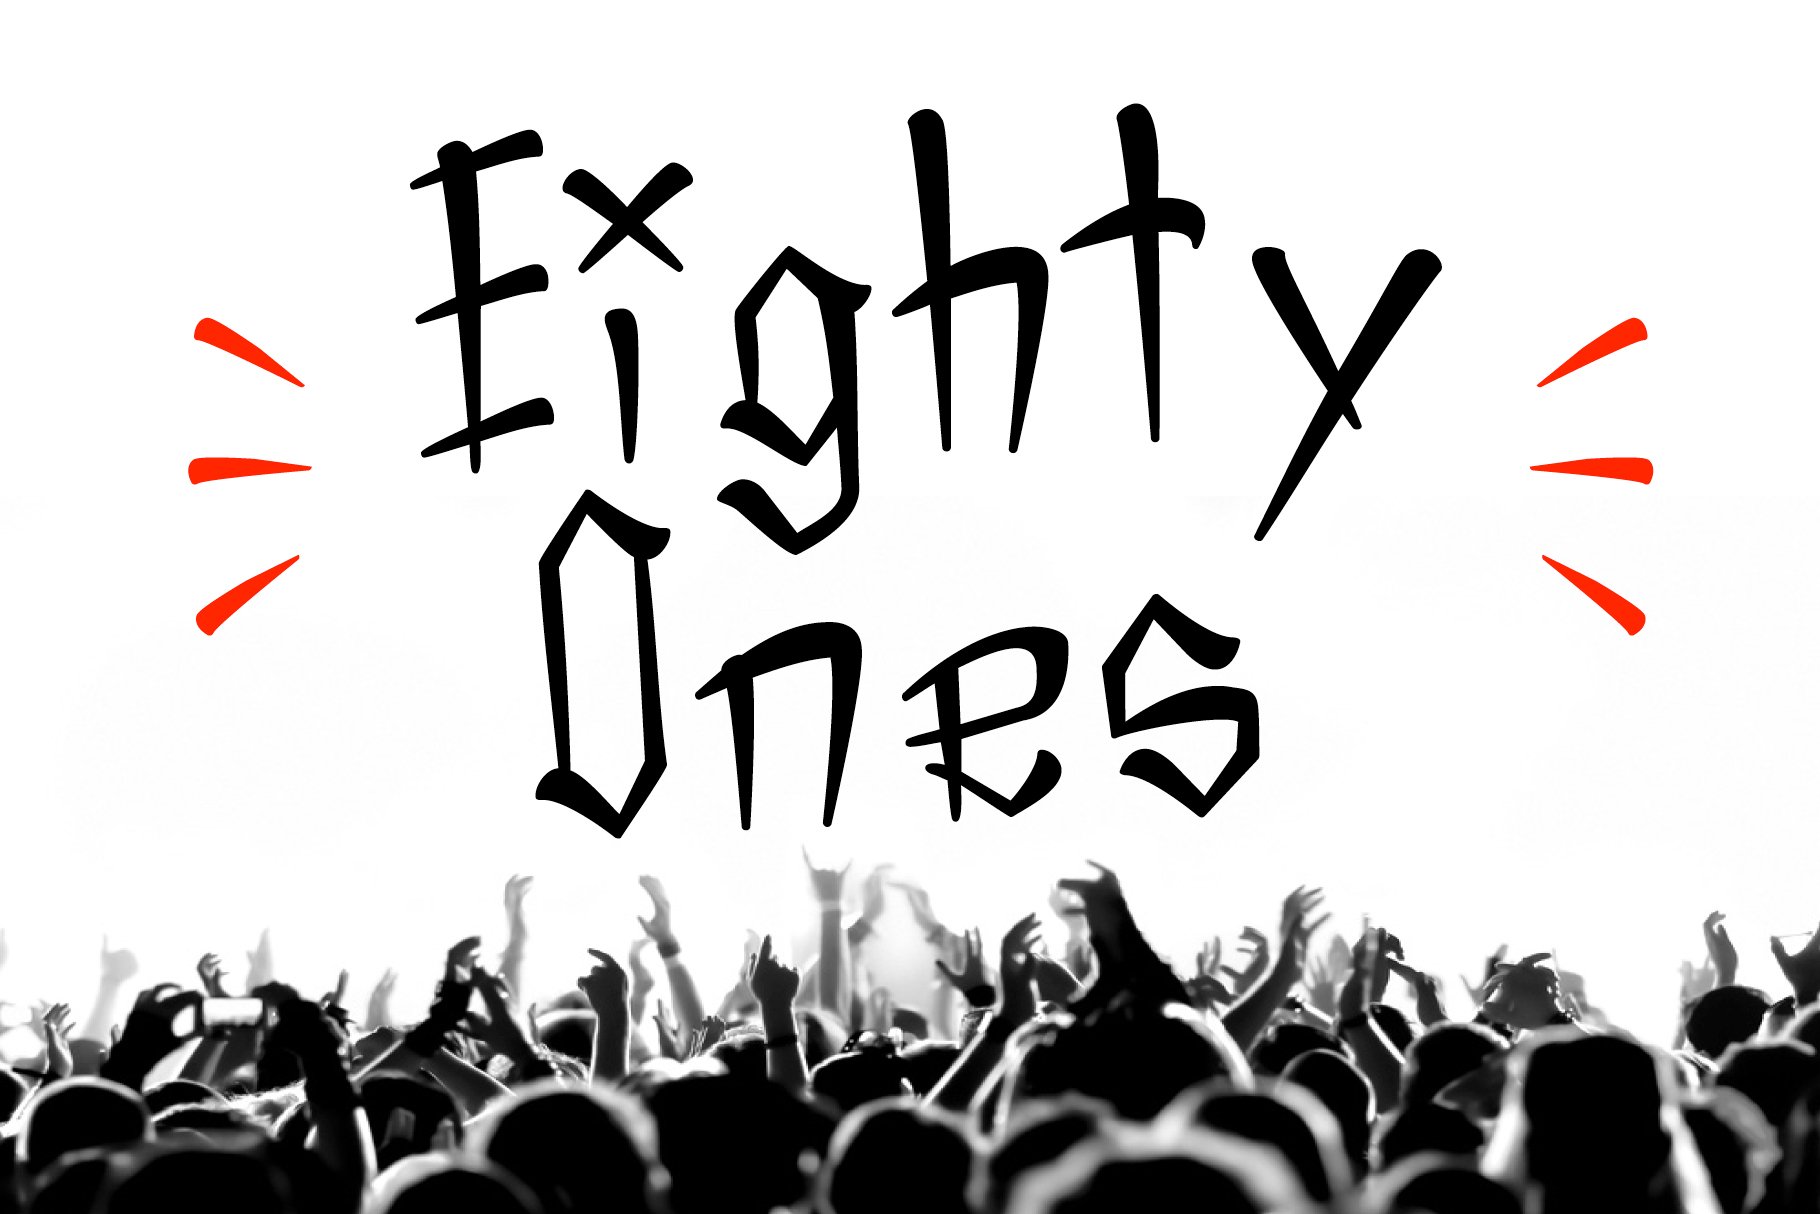 Eighty Ones cover image.